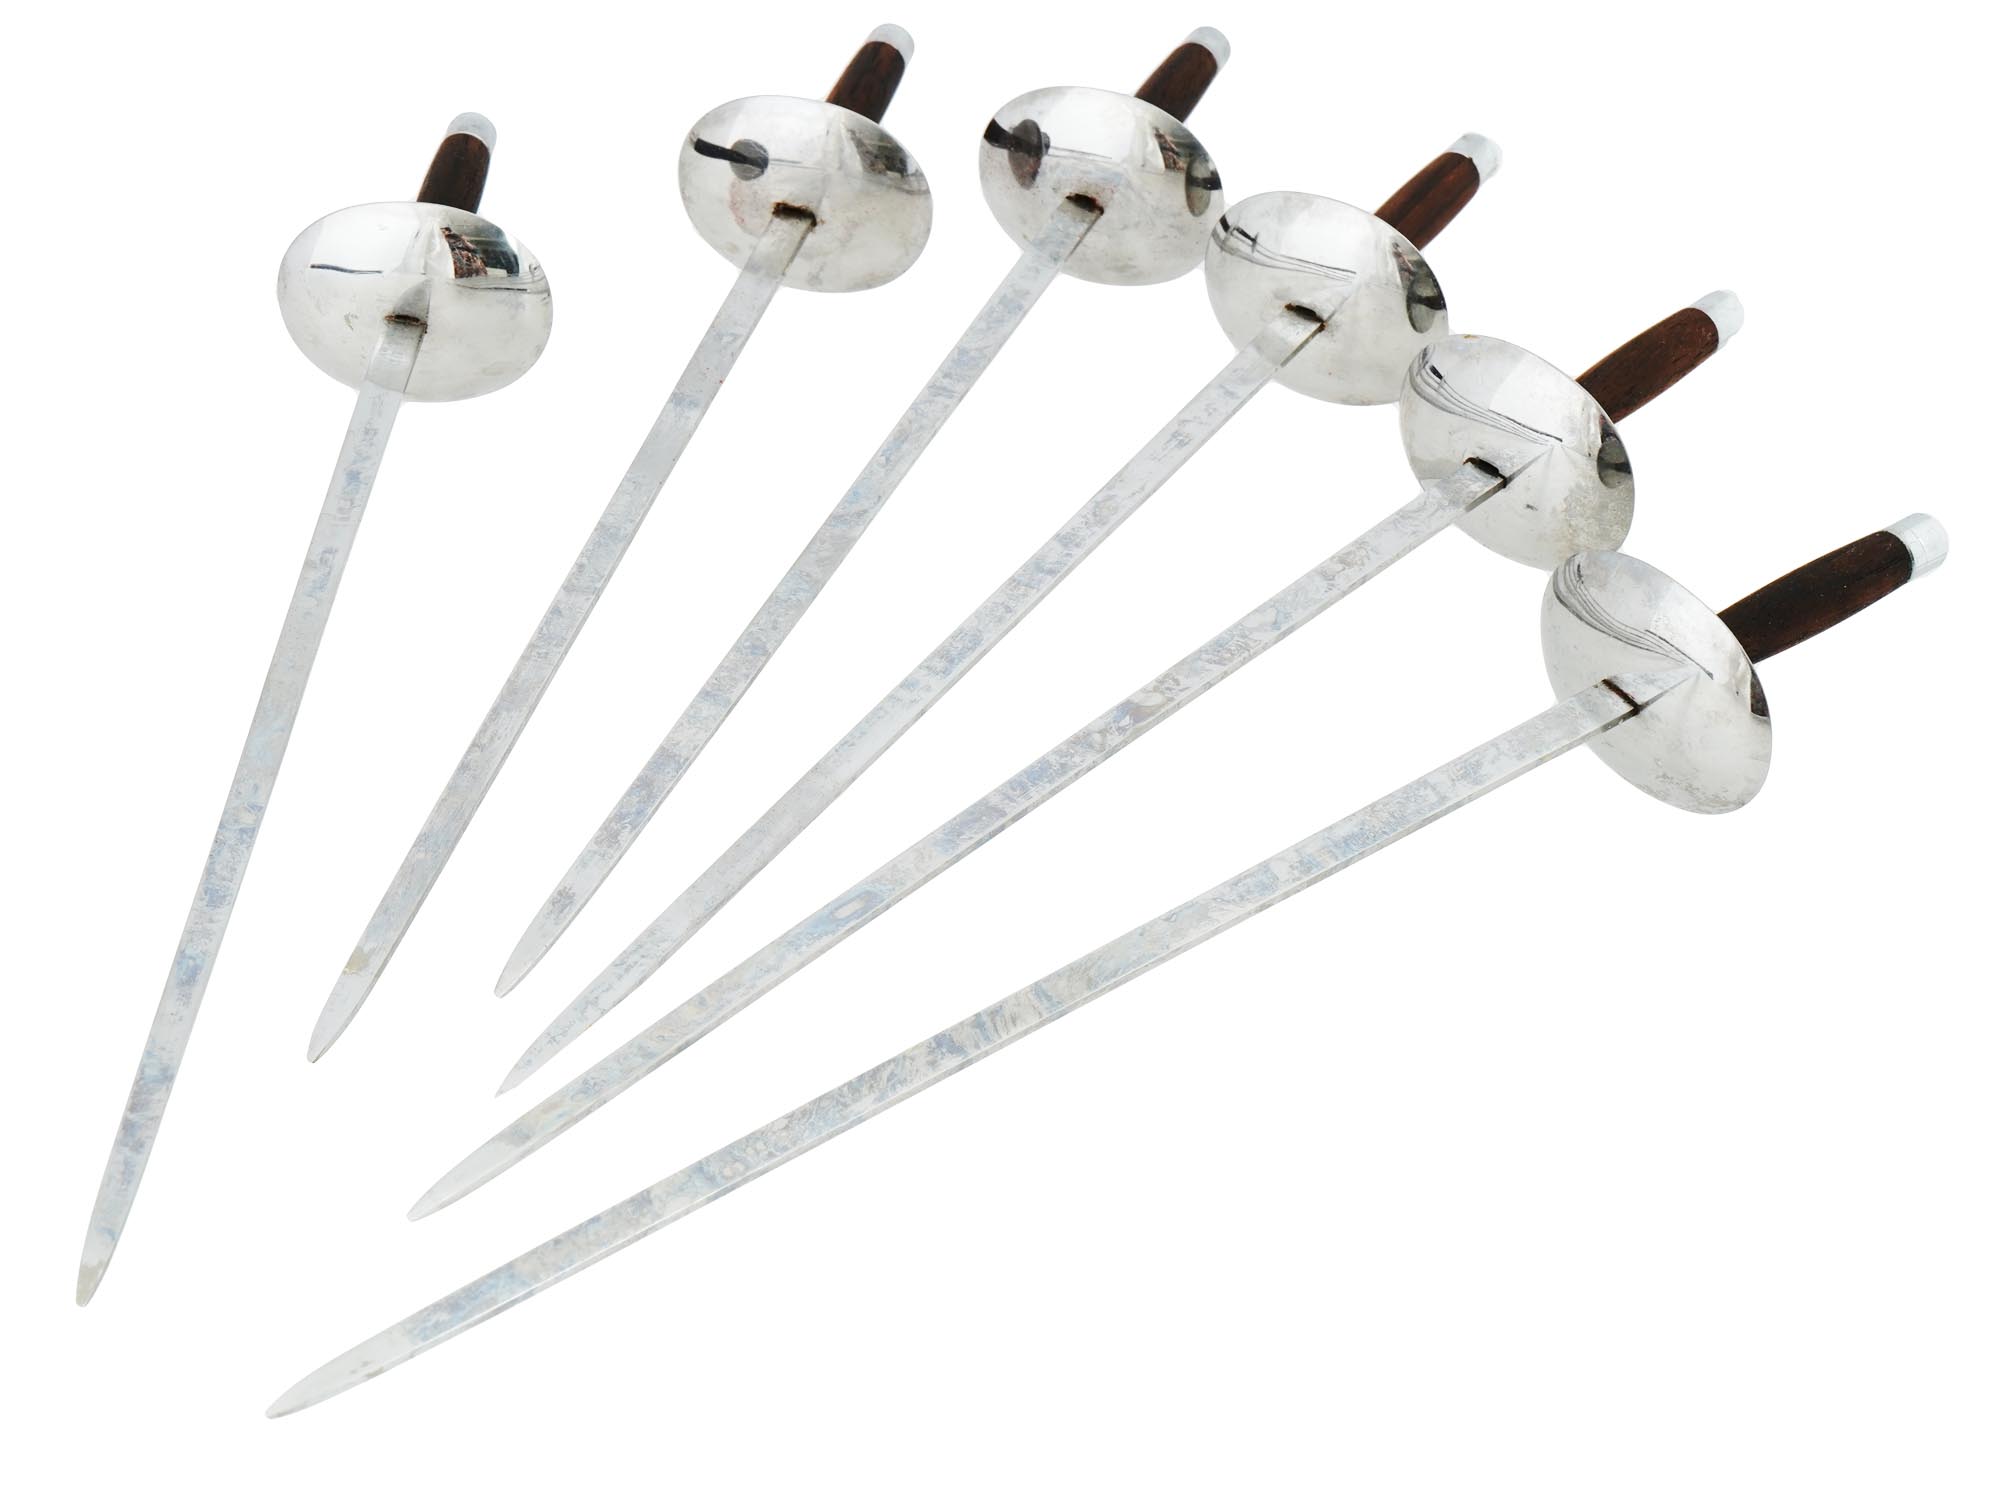 JAPANESE STAINLESS STEEL BARBEQUE SKEWERS IOB PIC-2